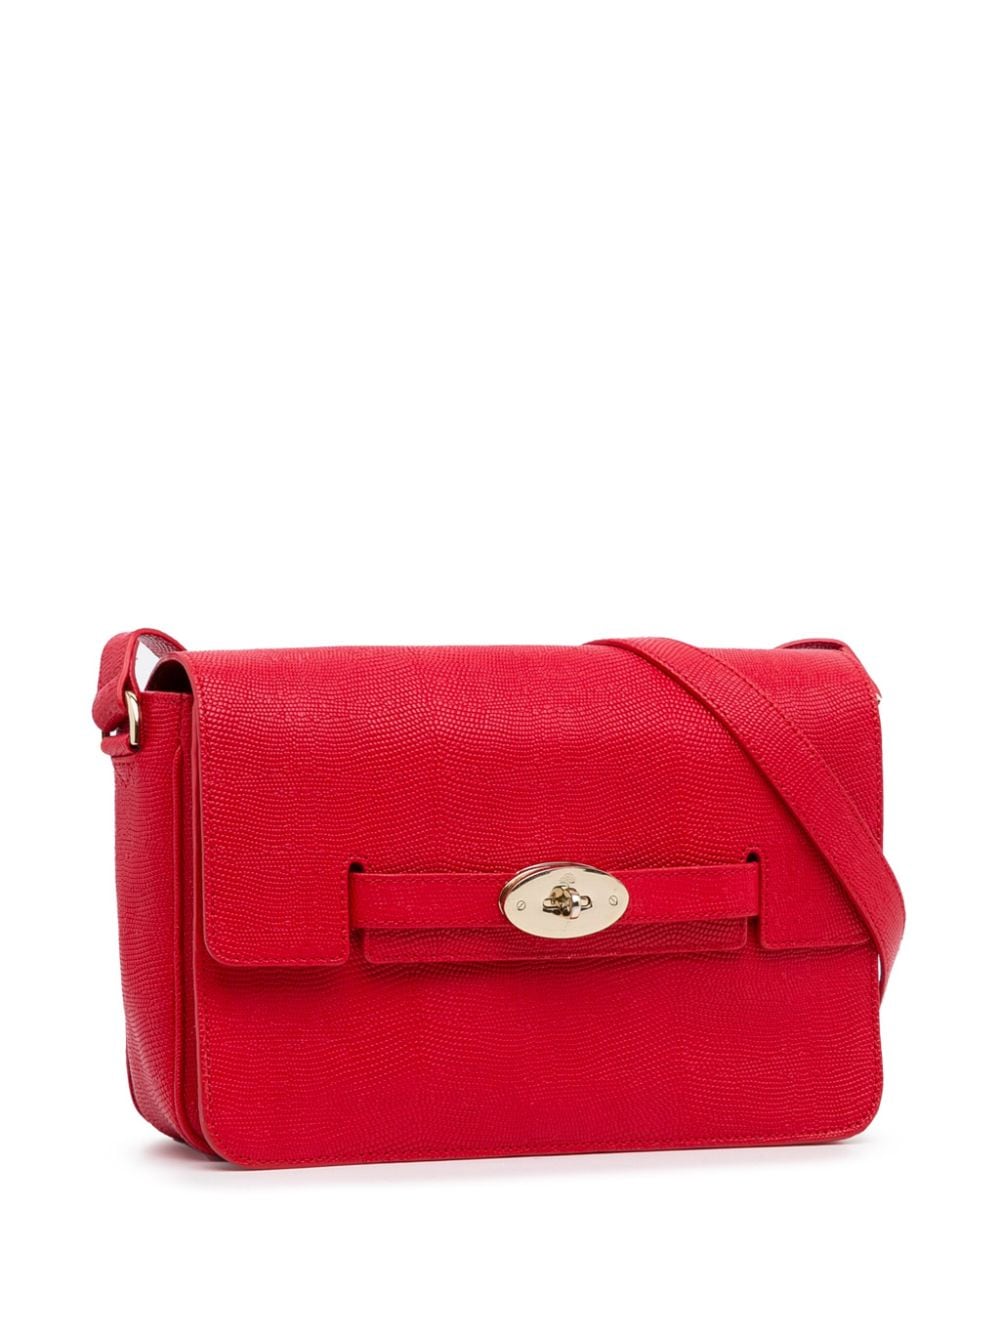 Pre-owned Mulberry Bayswater Crossbody Bag In Red